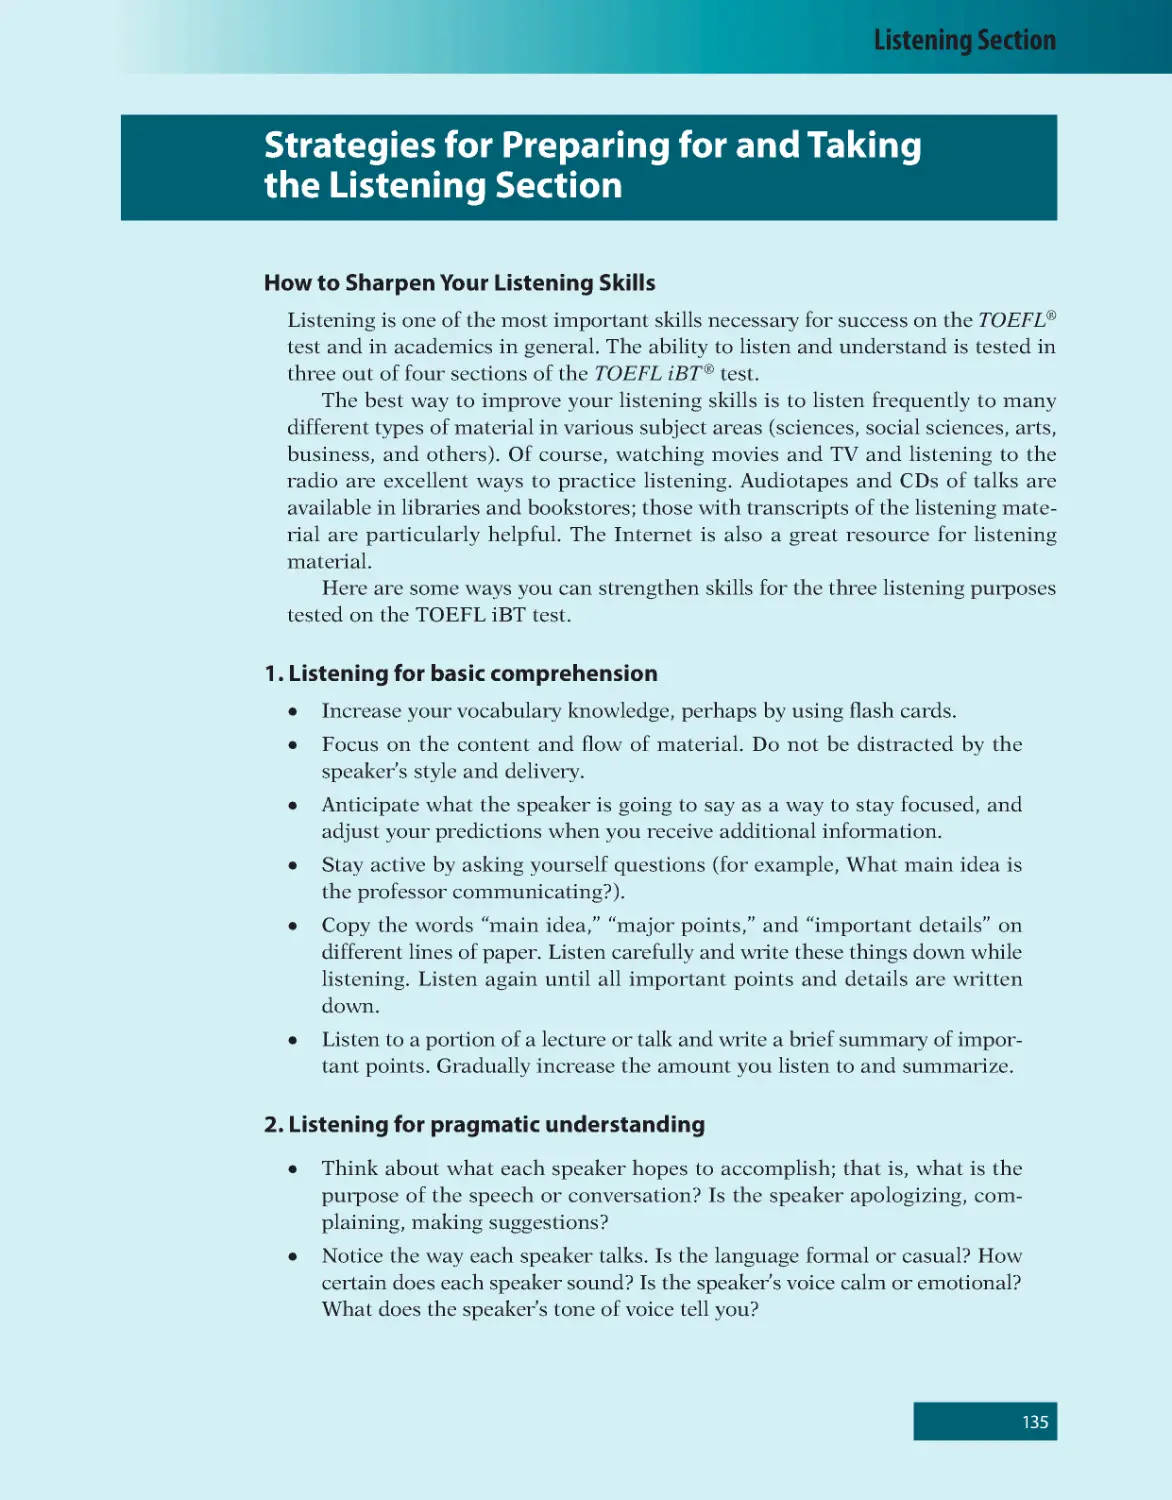 Strategies for Preparing for and Taking the Listening Section